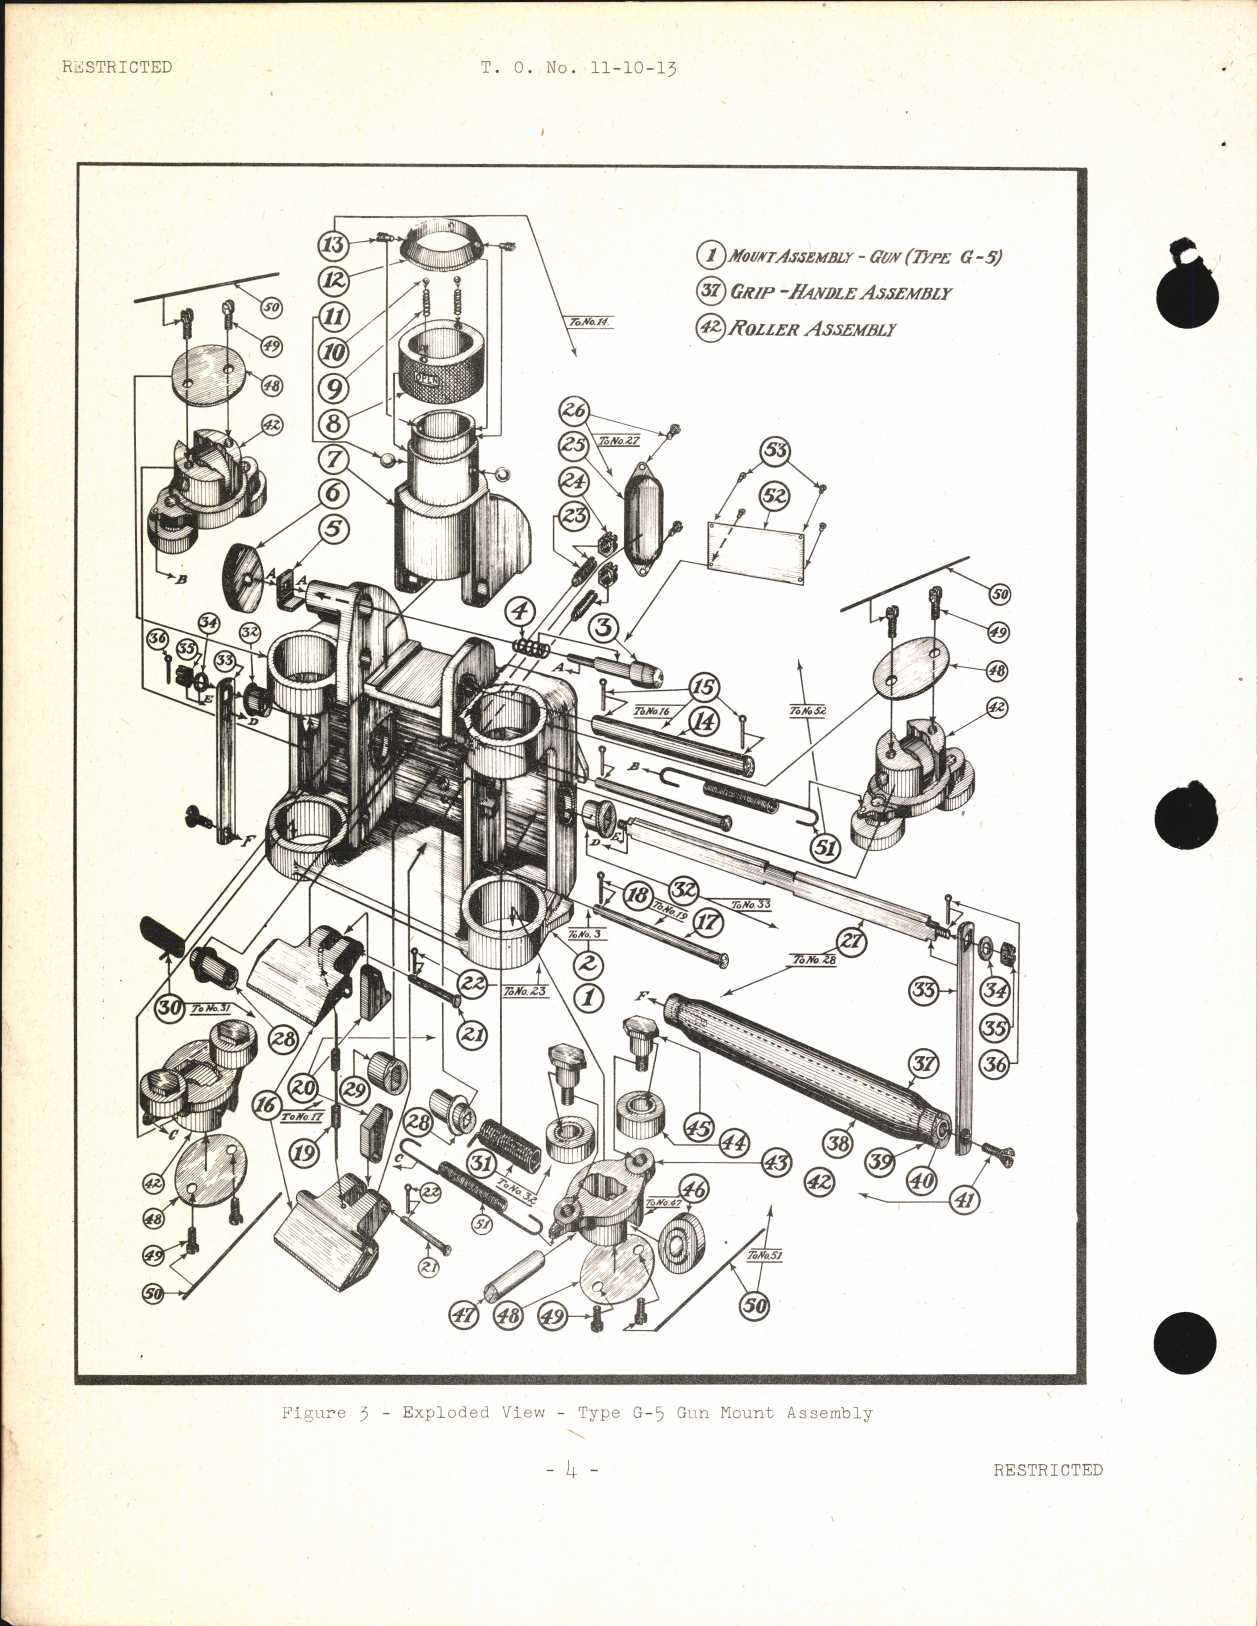 Sample page 8 from AirCorps Library document: Handbook of Instructions with Parts Catalog for Type G-5 Gun Mounts